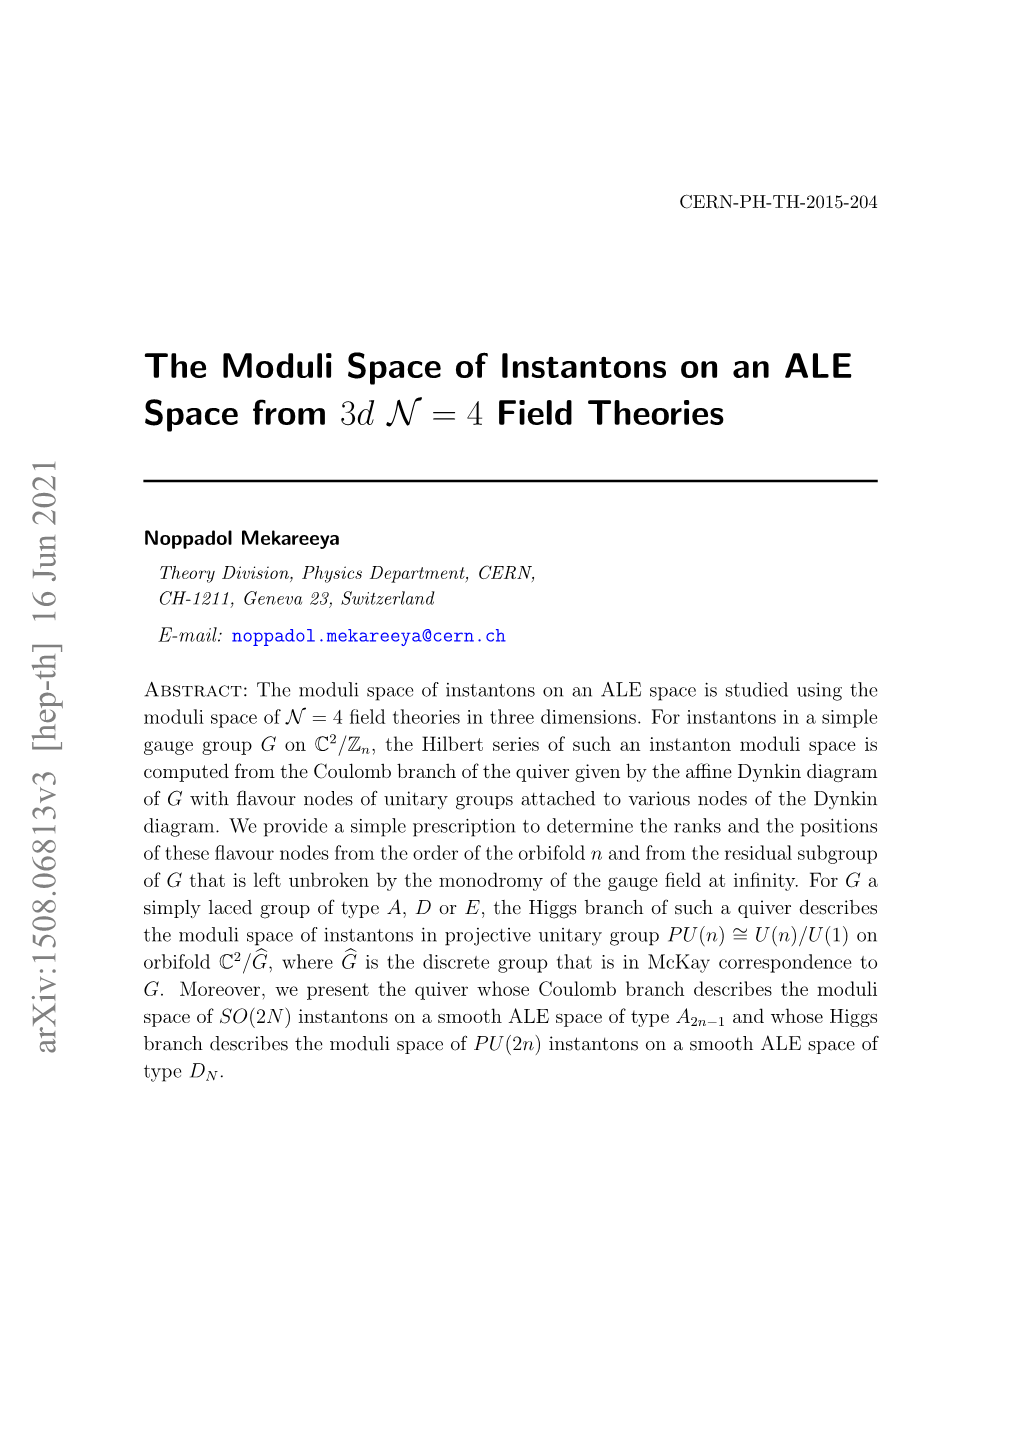 The Moduli Space of Instantons on an ALE Space from 3D N = 4 Field Theories